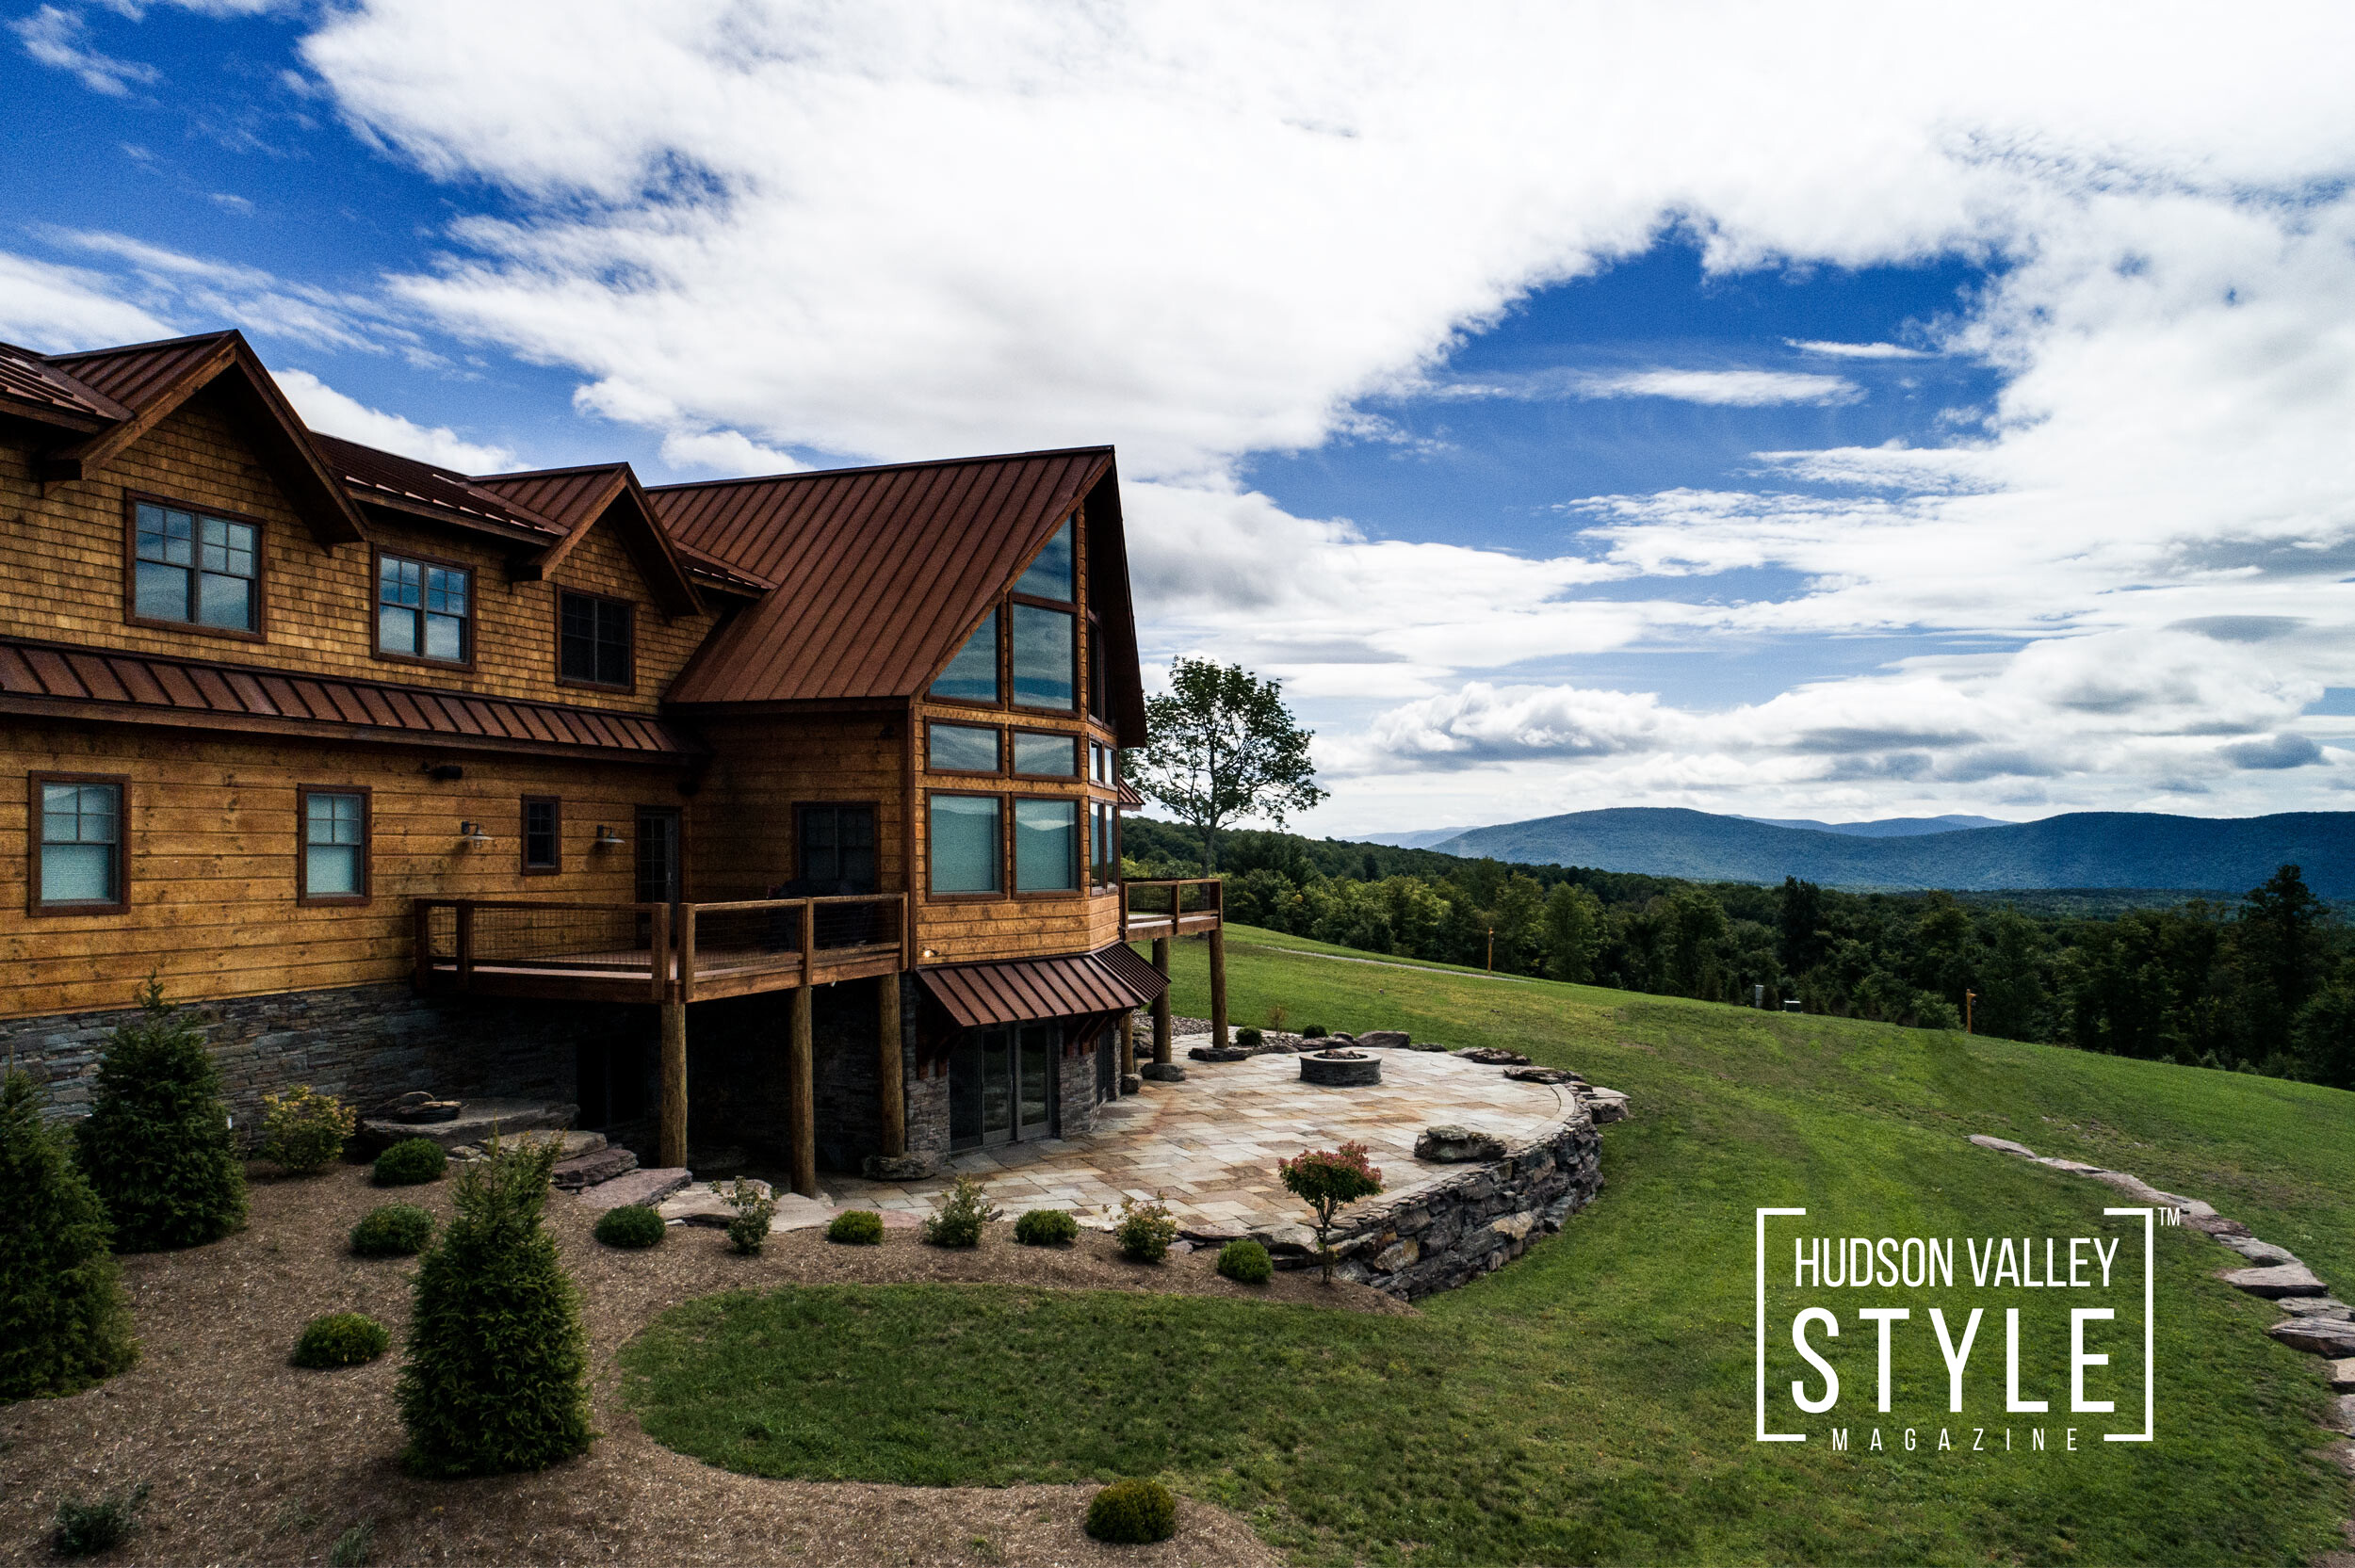 Are You Considering Professional Real Estate Photography for Your Hudson Valley Home? – Presented by Duncan Avenue Studios – Hudson Valley Real Estate Photography